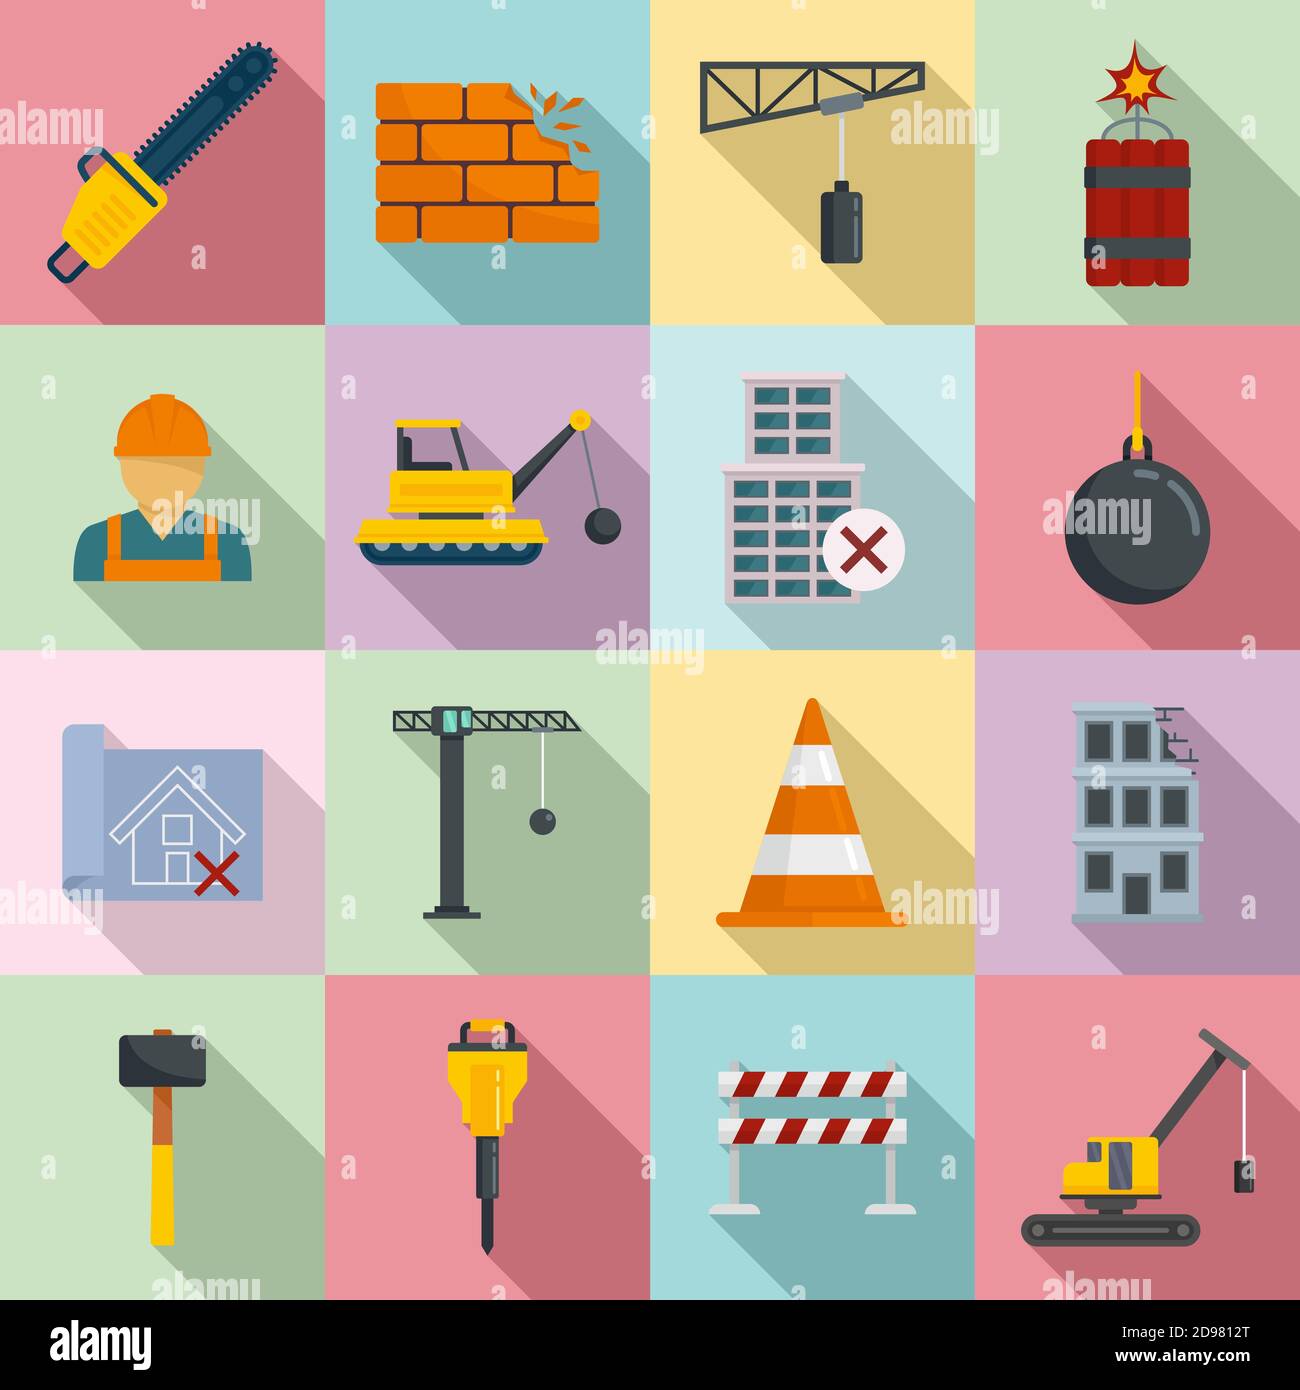 Demolition work icons set, flat style Stock Vector